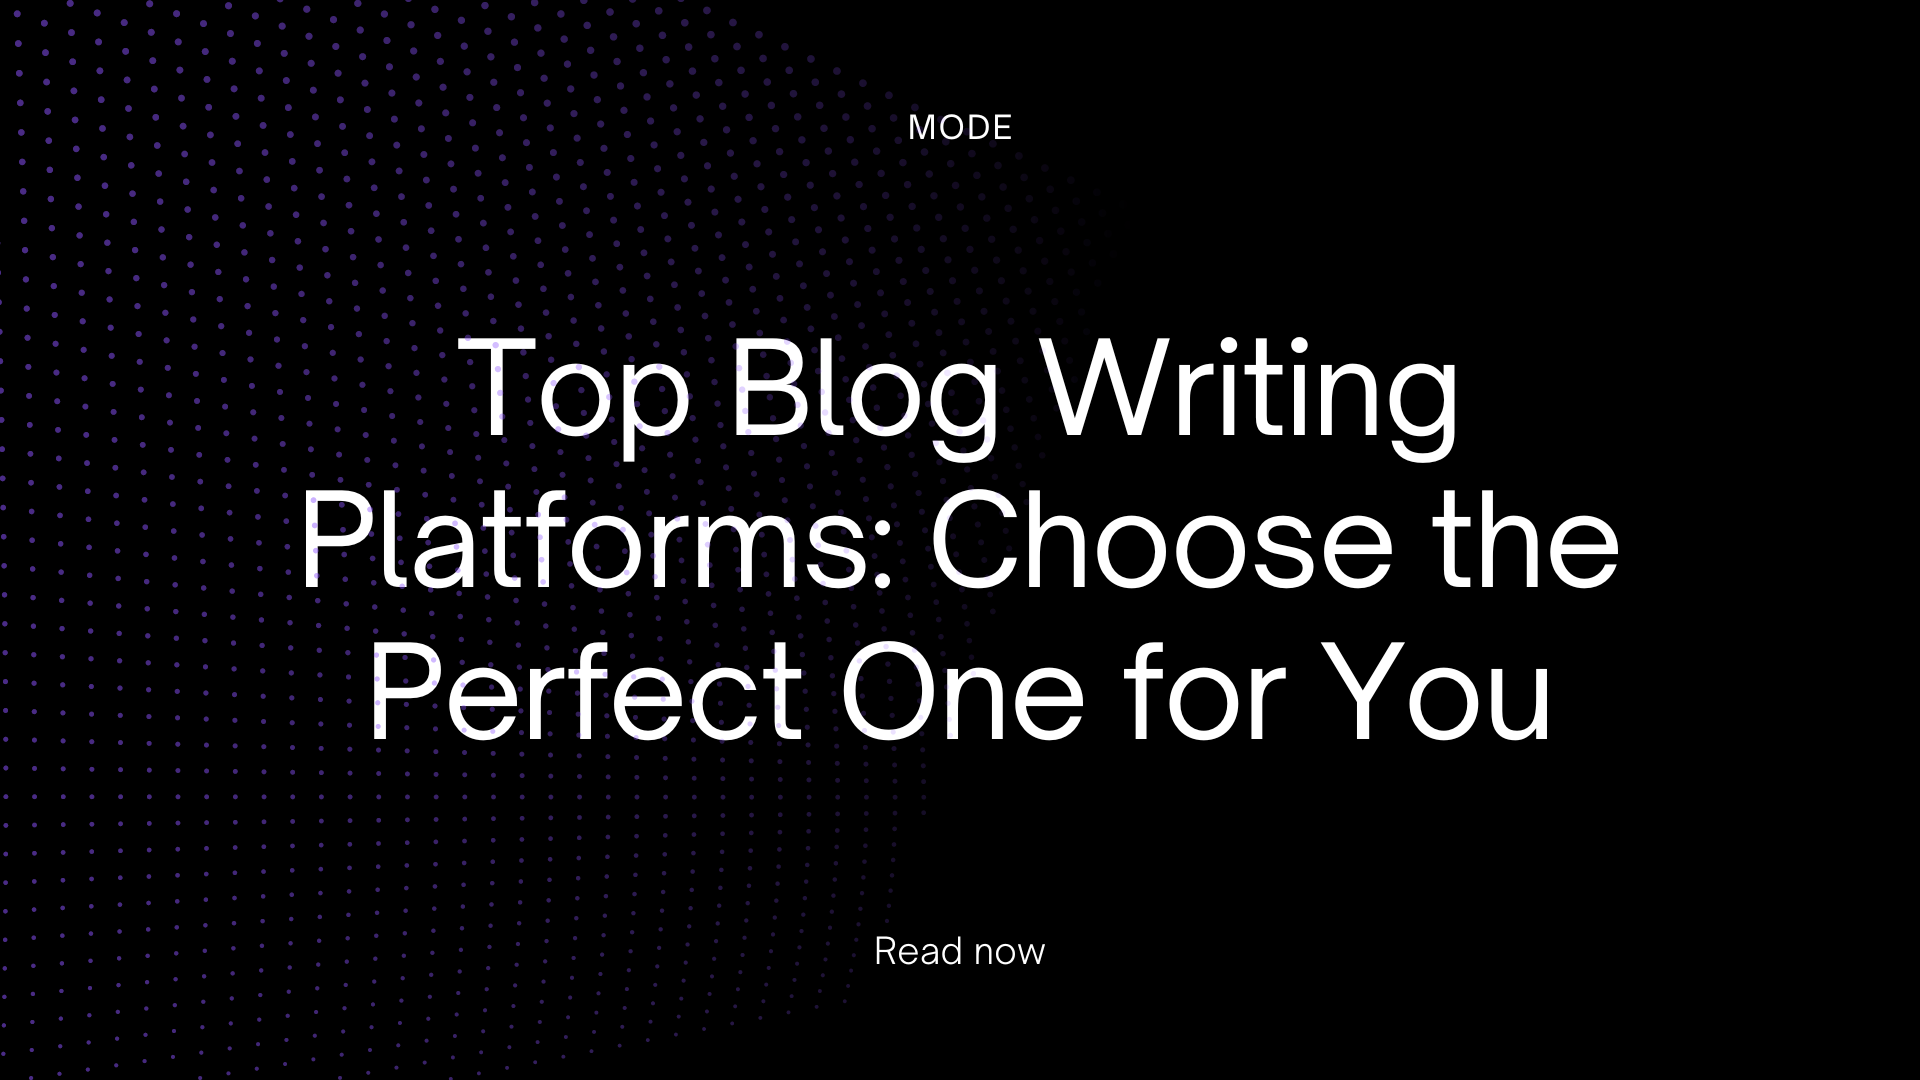 Top Blog Writing Platforms: Choose the Perfect One for You